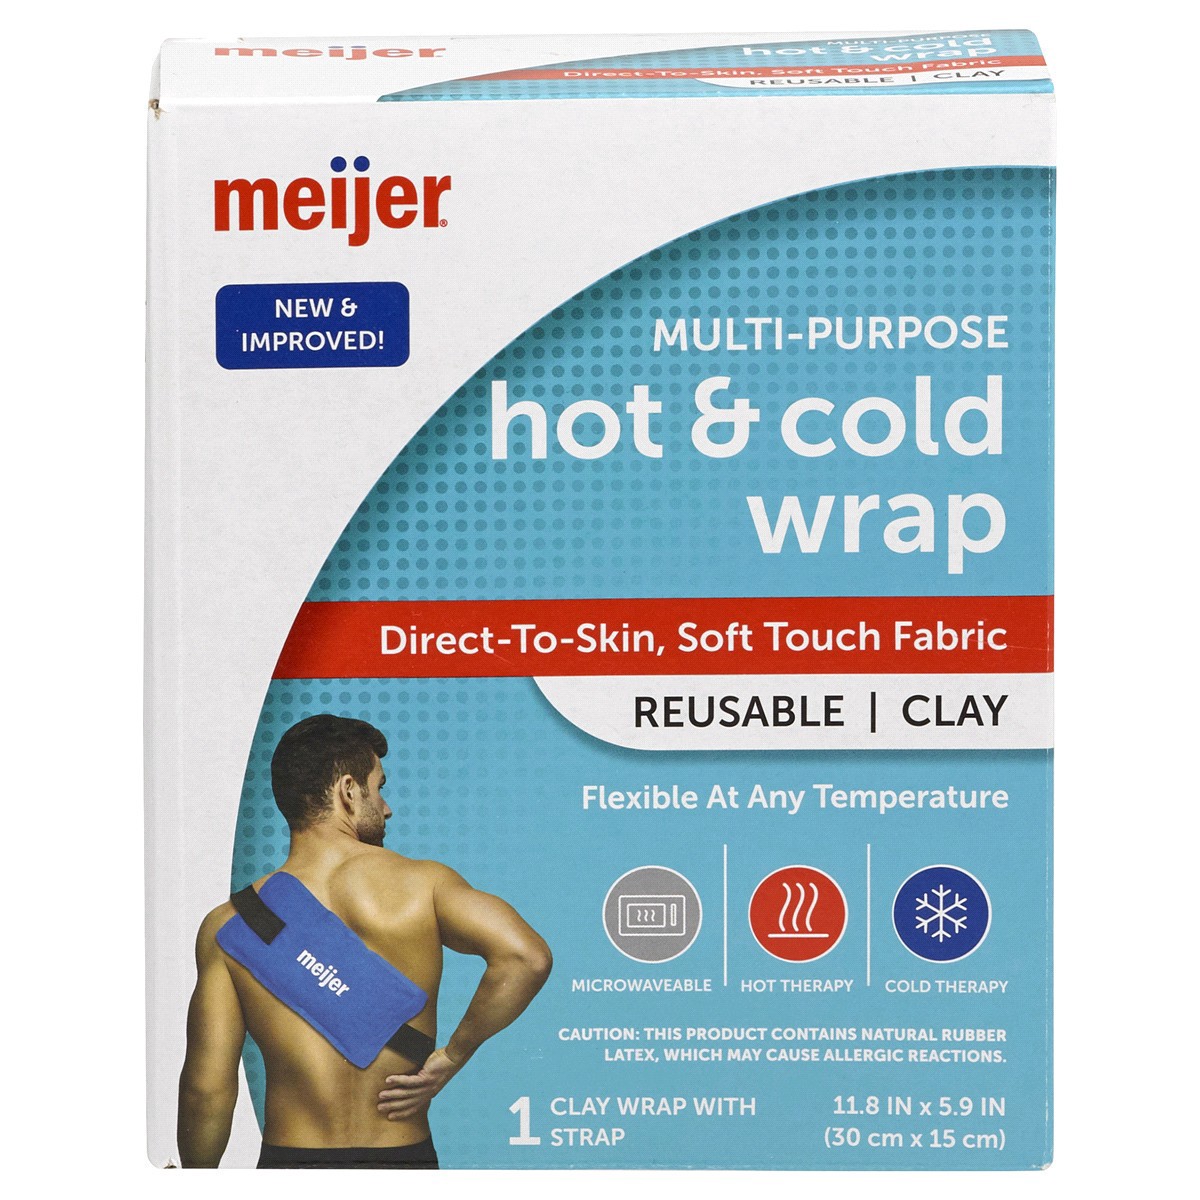 slide 1 of 5, Meijer Multi-Purpose Hot & Cold Reusable Clay Wrap, 1 ct